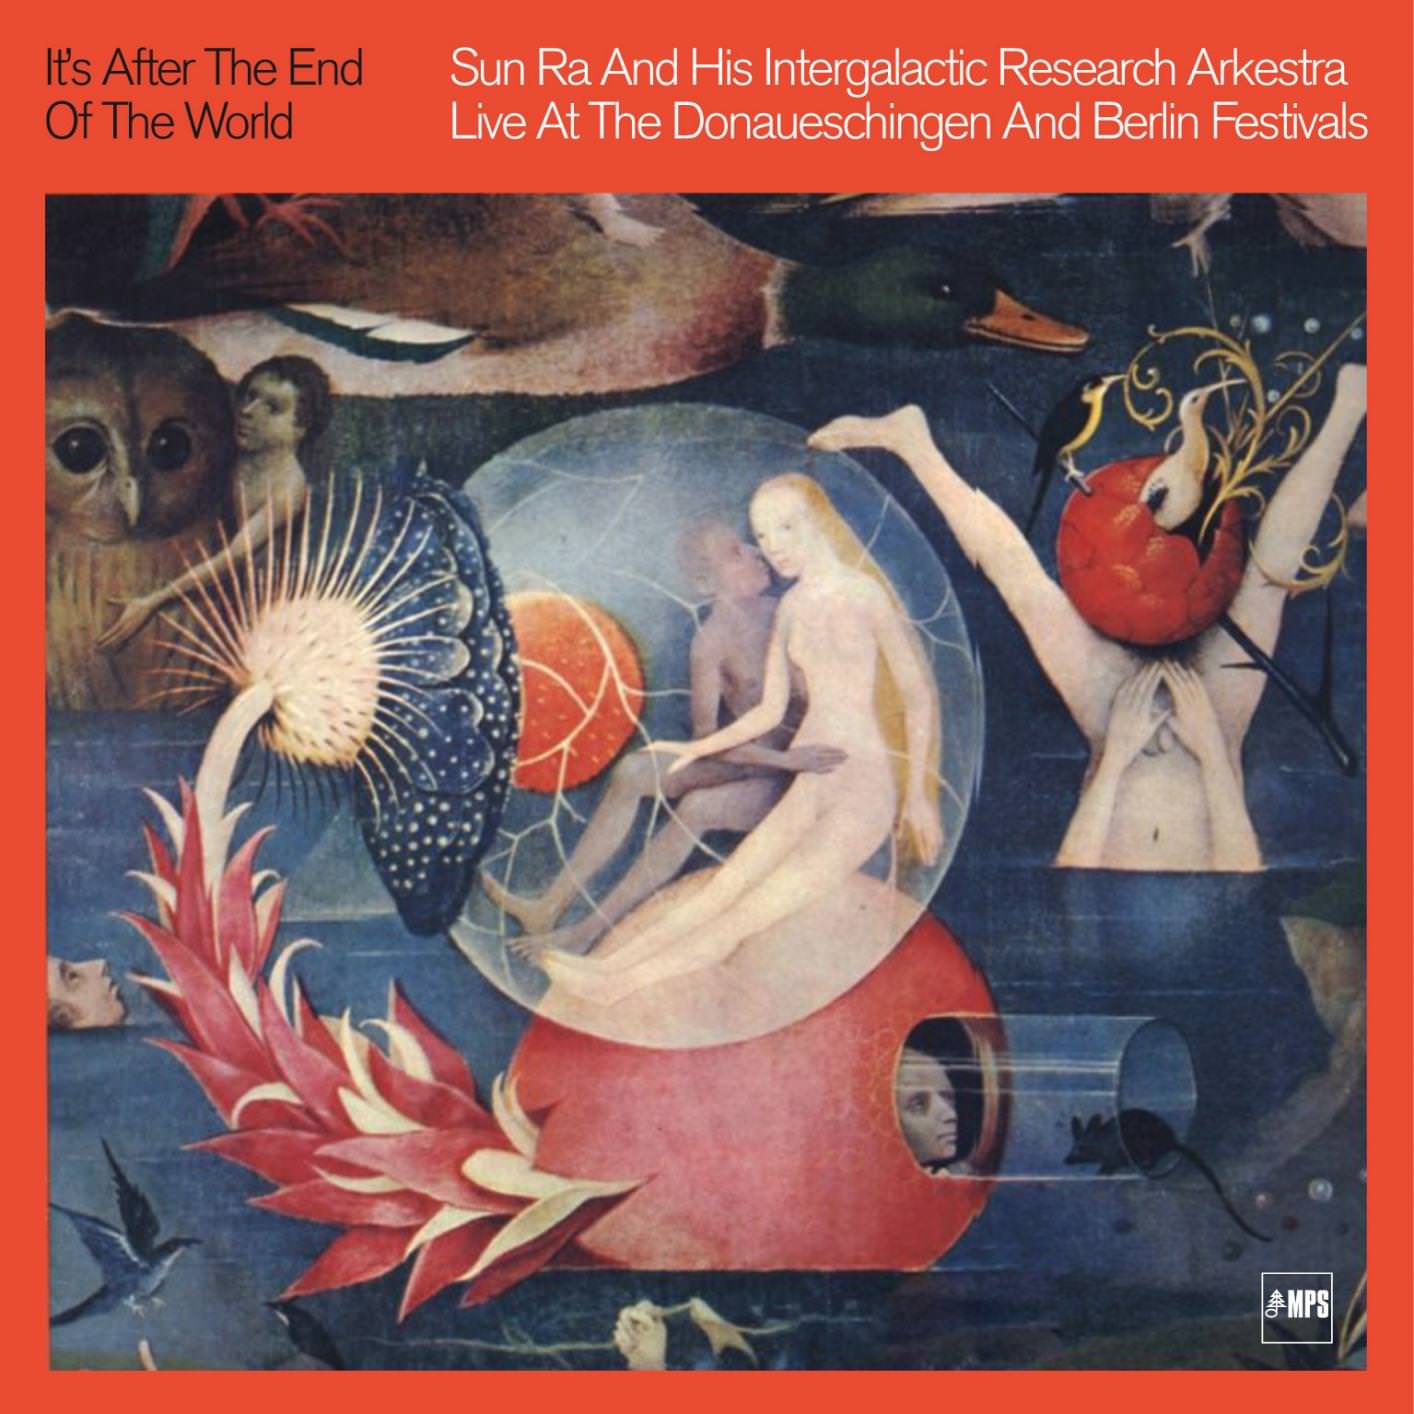 Sun Ra - It’s After The End Of The World (1970/2014) [ProStudioMasters FLAC 24bit/44,1kHz]